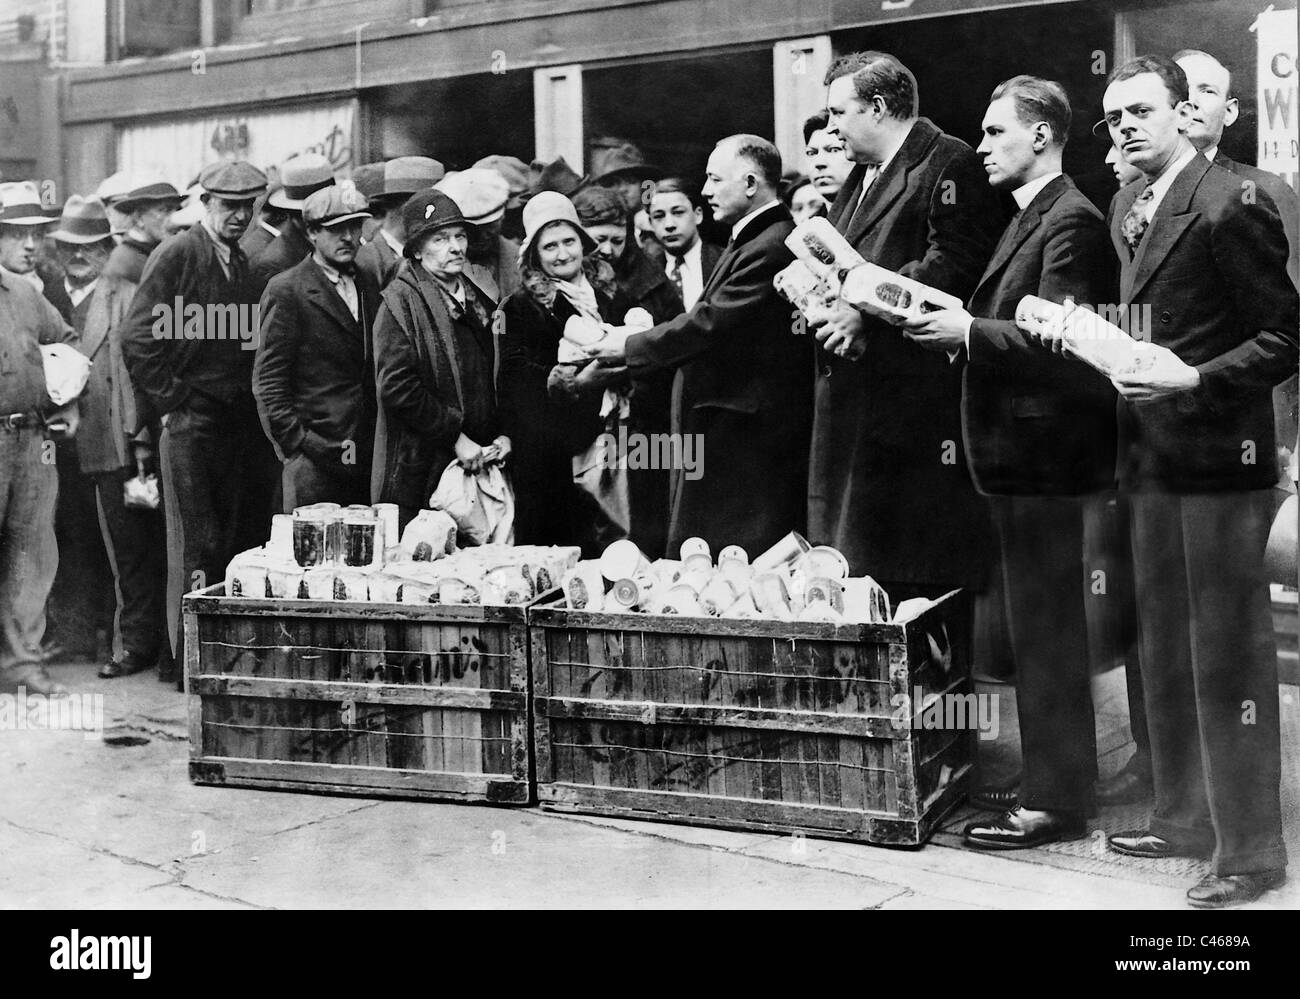 Congress Candidates Distribute Food During The Great Depression 1930 C4689A 